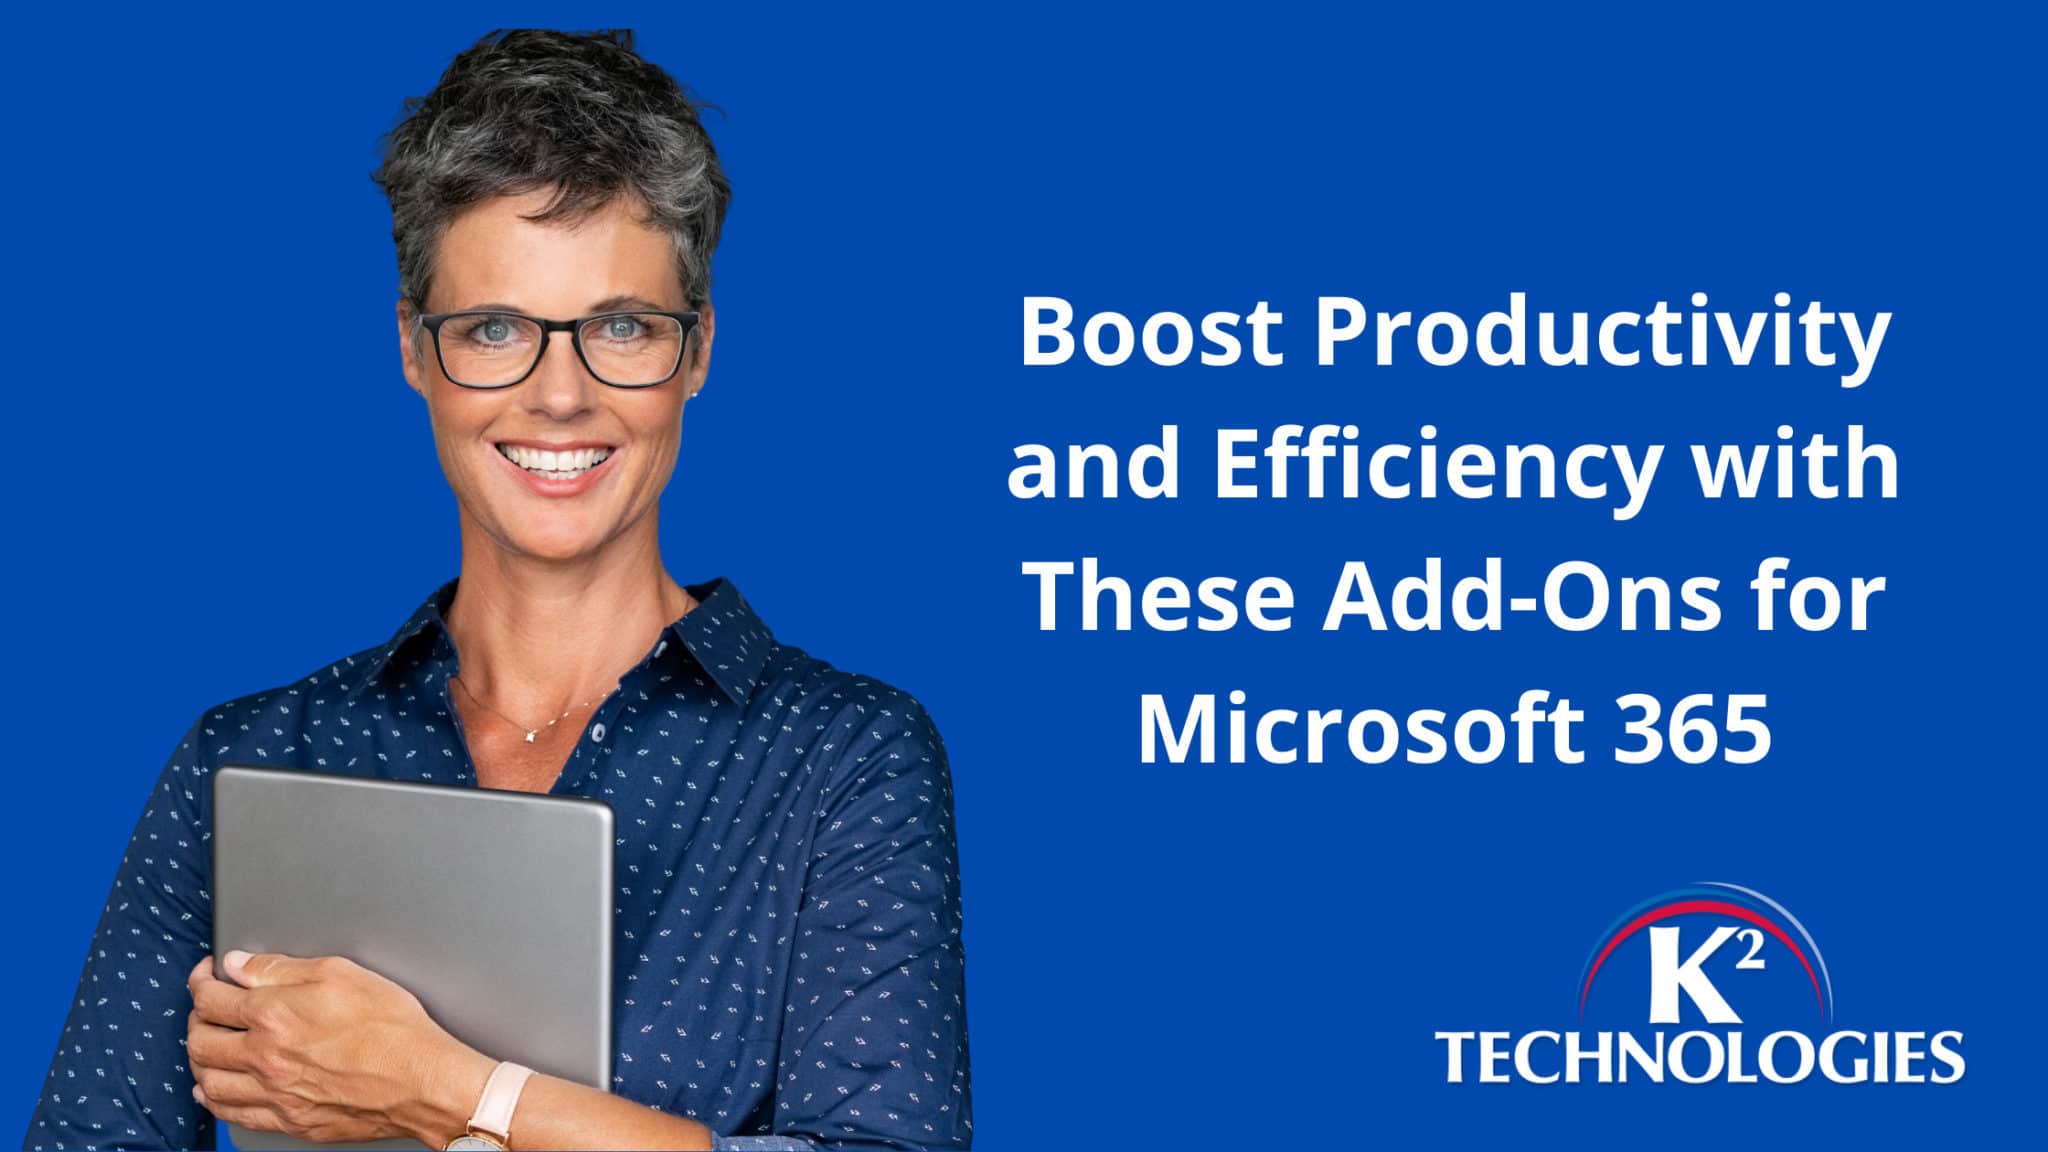 Boost Productivity and Efficiency with These Add-Ons for Microsoft 365